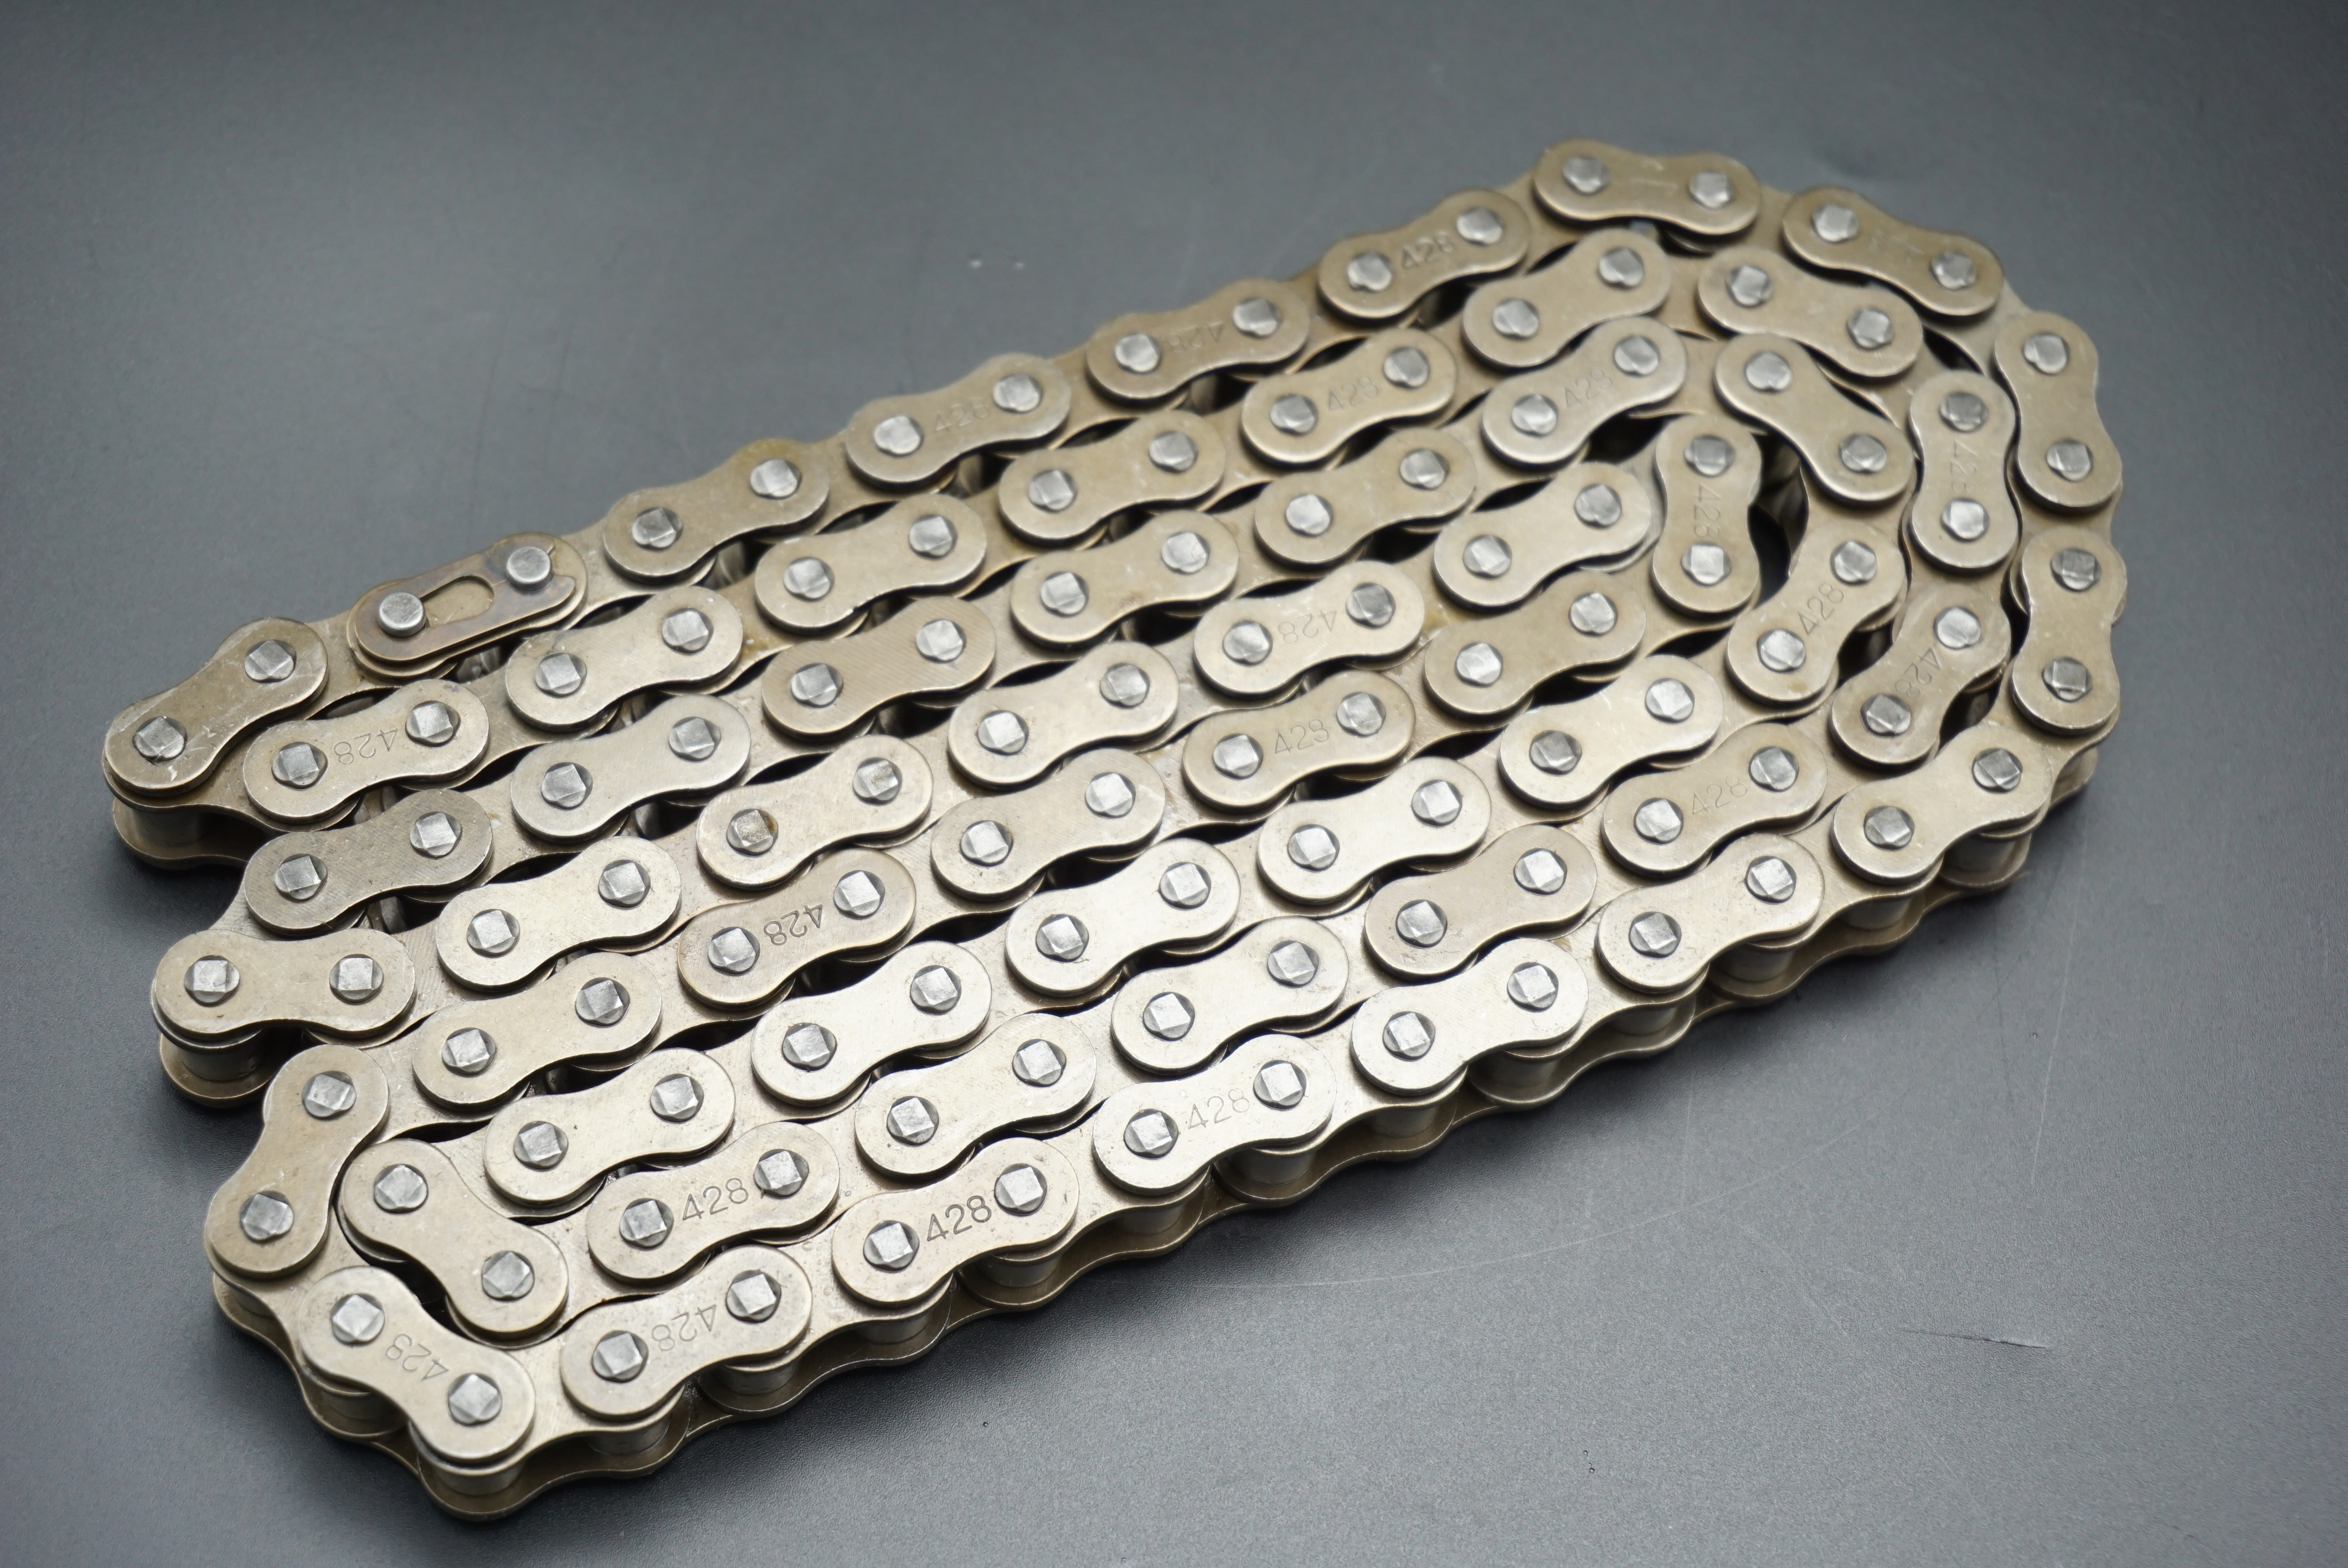 What is the difference between washing or not washing the motorcycle chain?